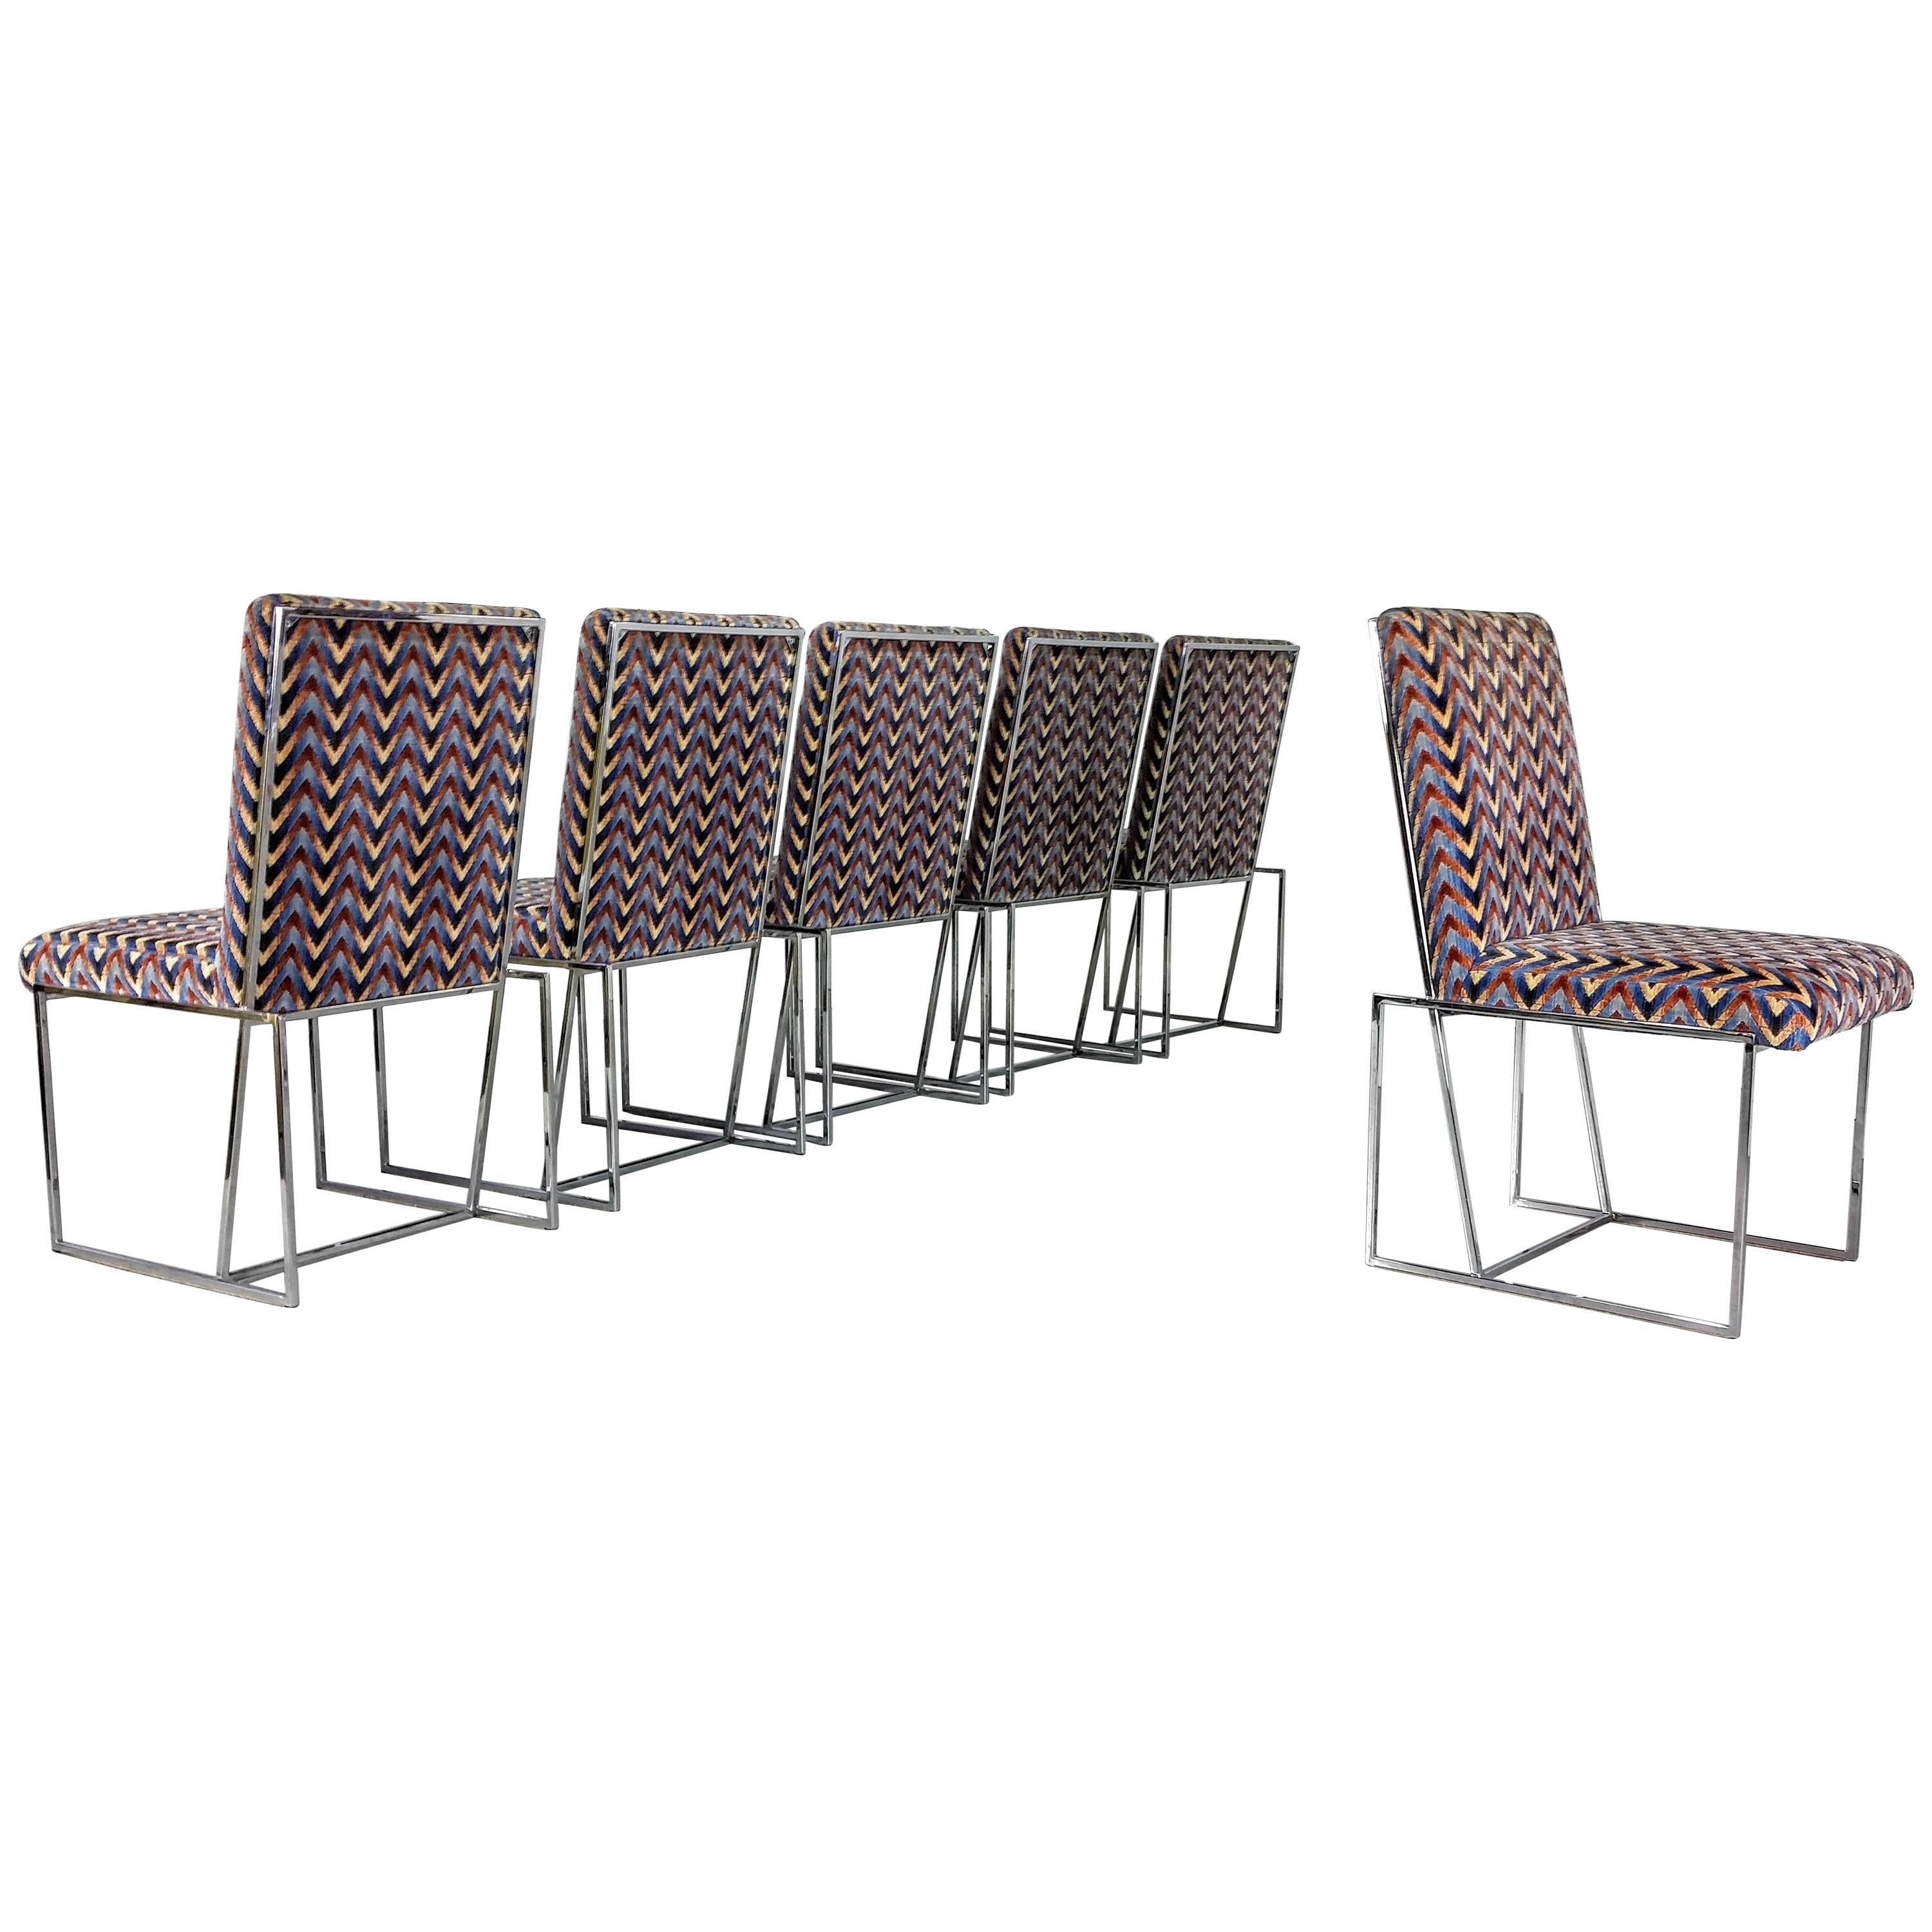 Rare Architectural Chrome Dining Chairs in the Style of Milo Baughman, 1970s